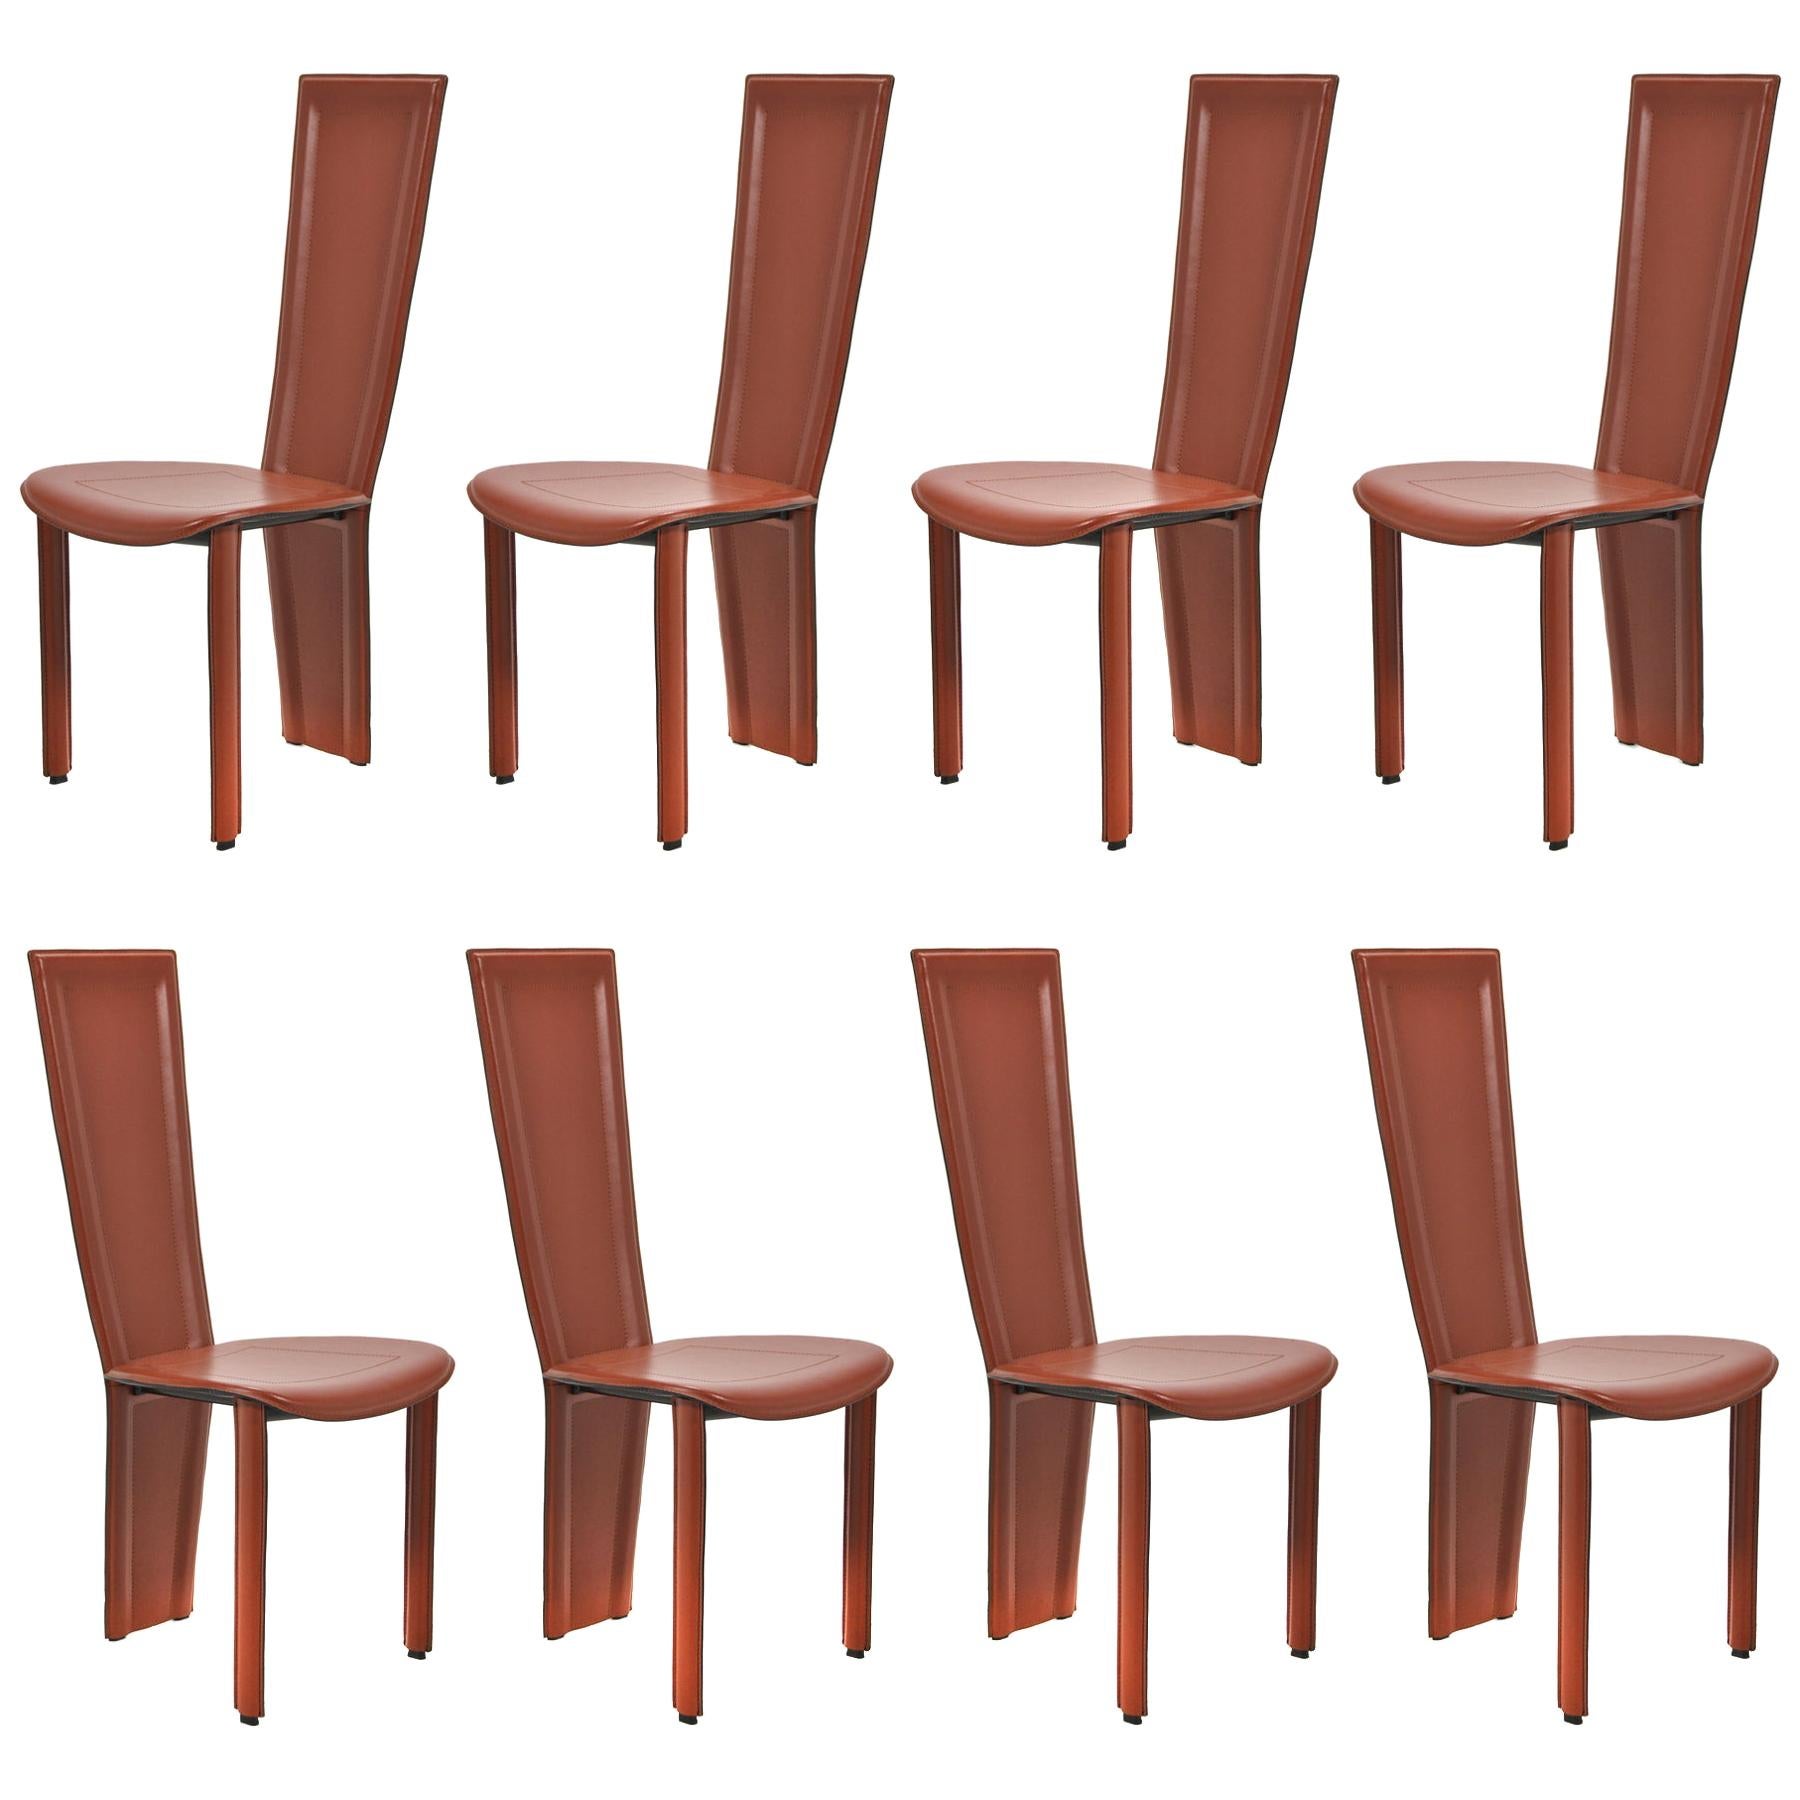 Set of 8 "Marilyn" Italian Post-Modern Leather Chairs